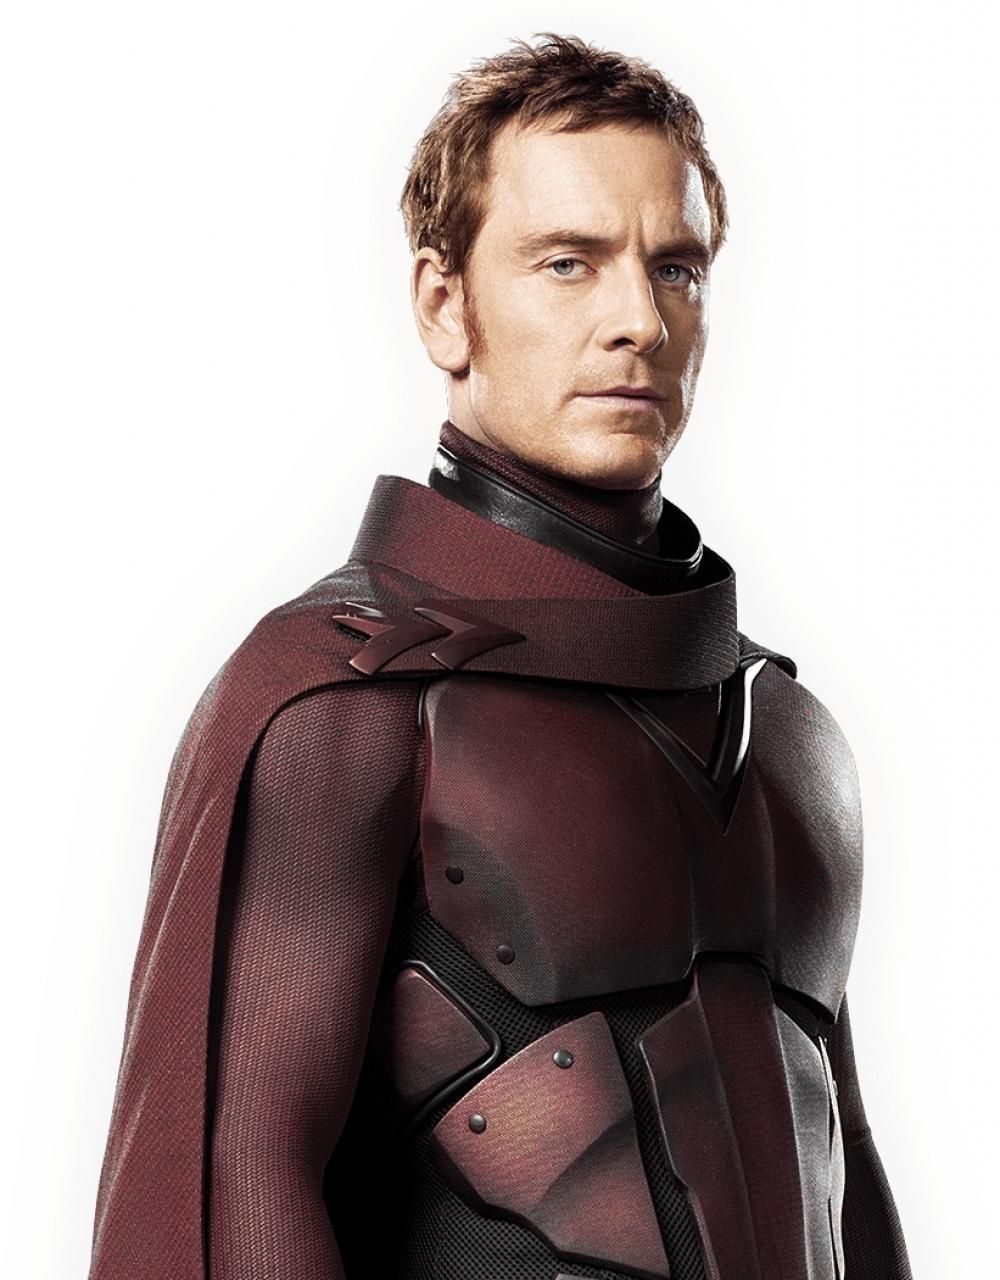 X-men: Days of Future Past character photo #5